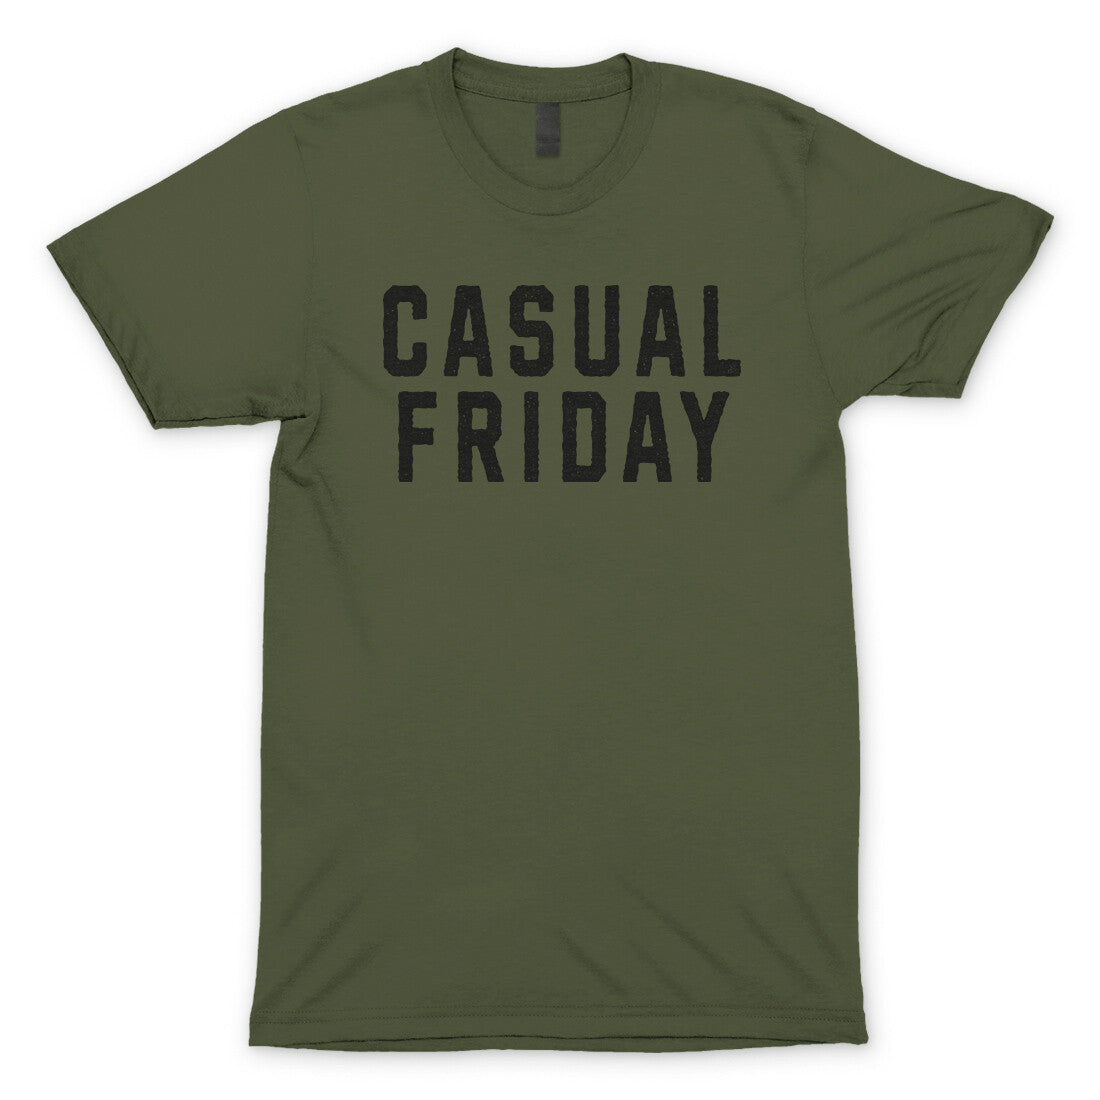 Casual Friday in Military Green Color